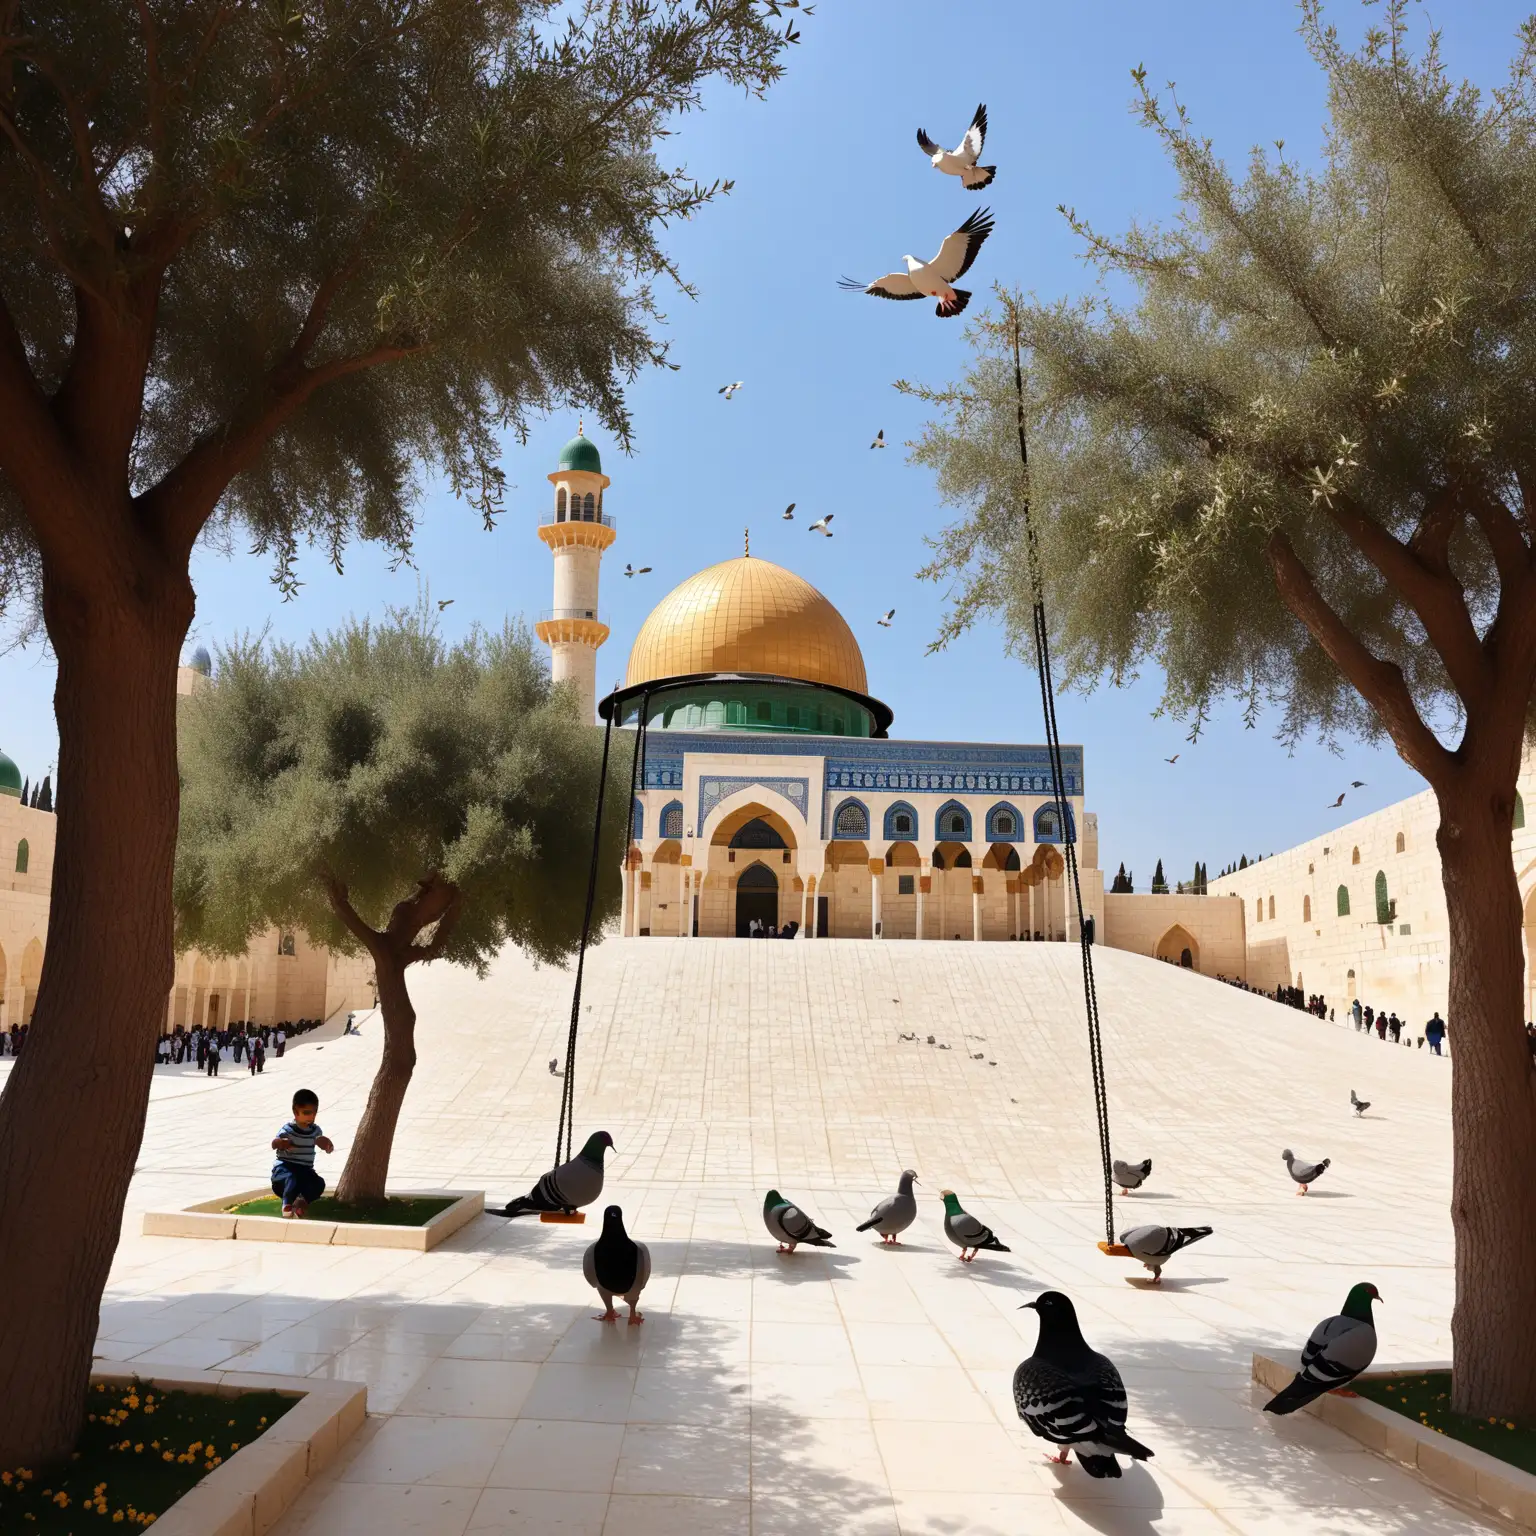 Atmosphere many children of Gaza playing with happiness in Al-Aqsa mosque, heavenly, some pigeons, beautiful olive trees, spring, flowers, the slide, swing.